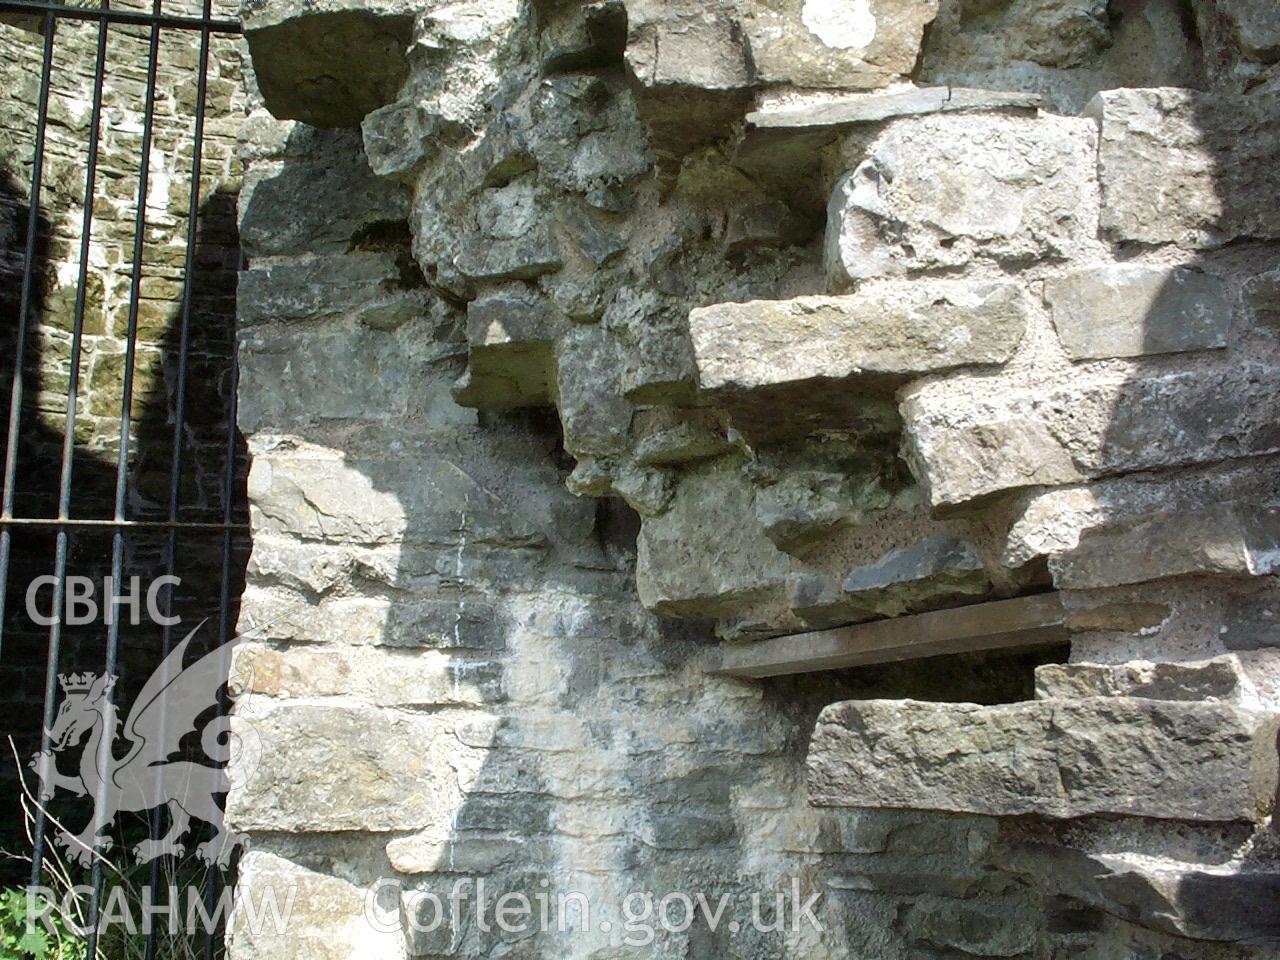 Colour digital image relating to  Standing Building Recording Report for Dinefwr Castle North West Tower 2002.